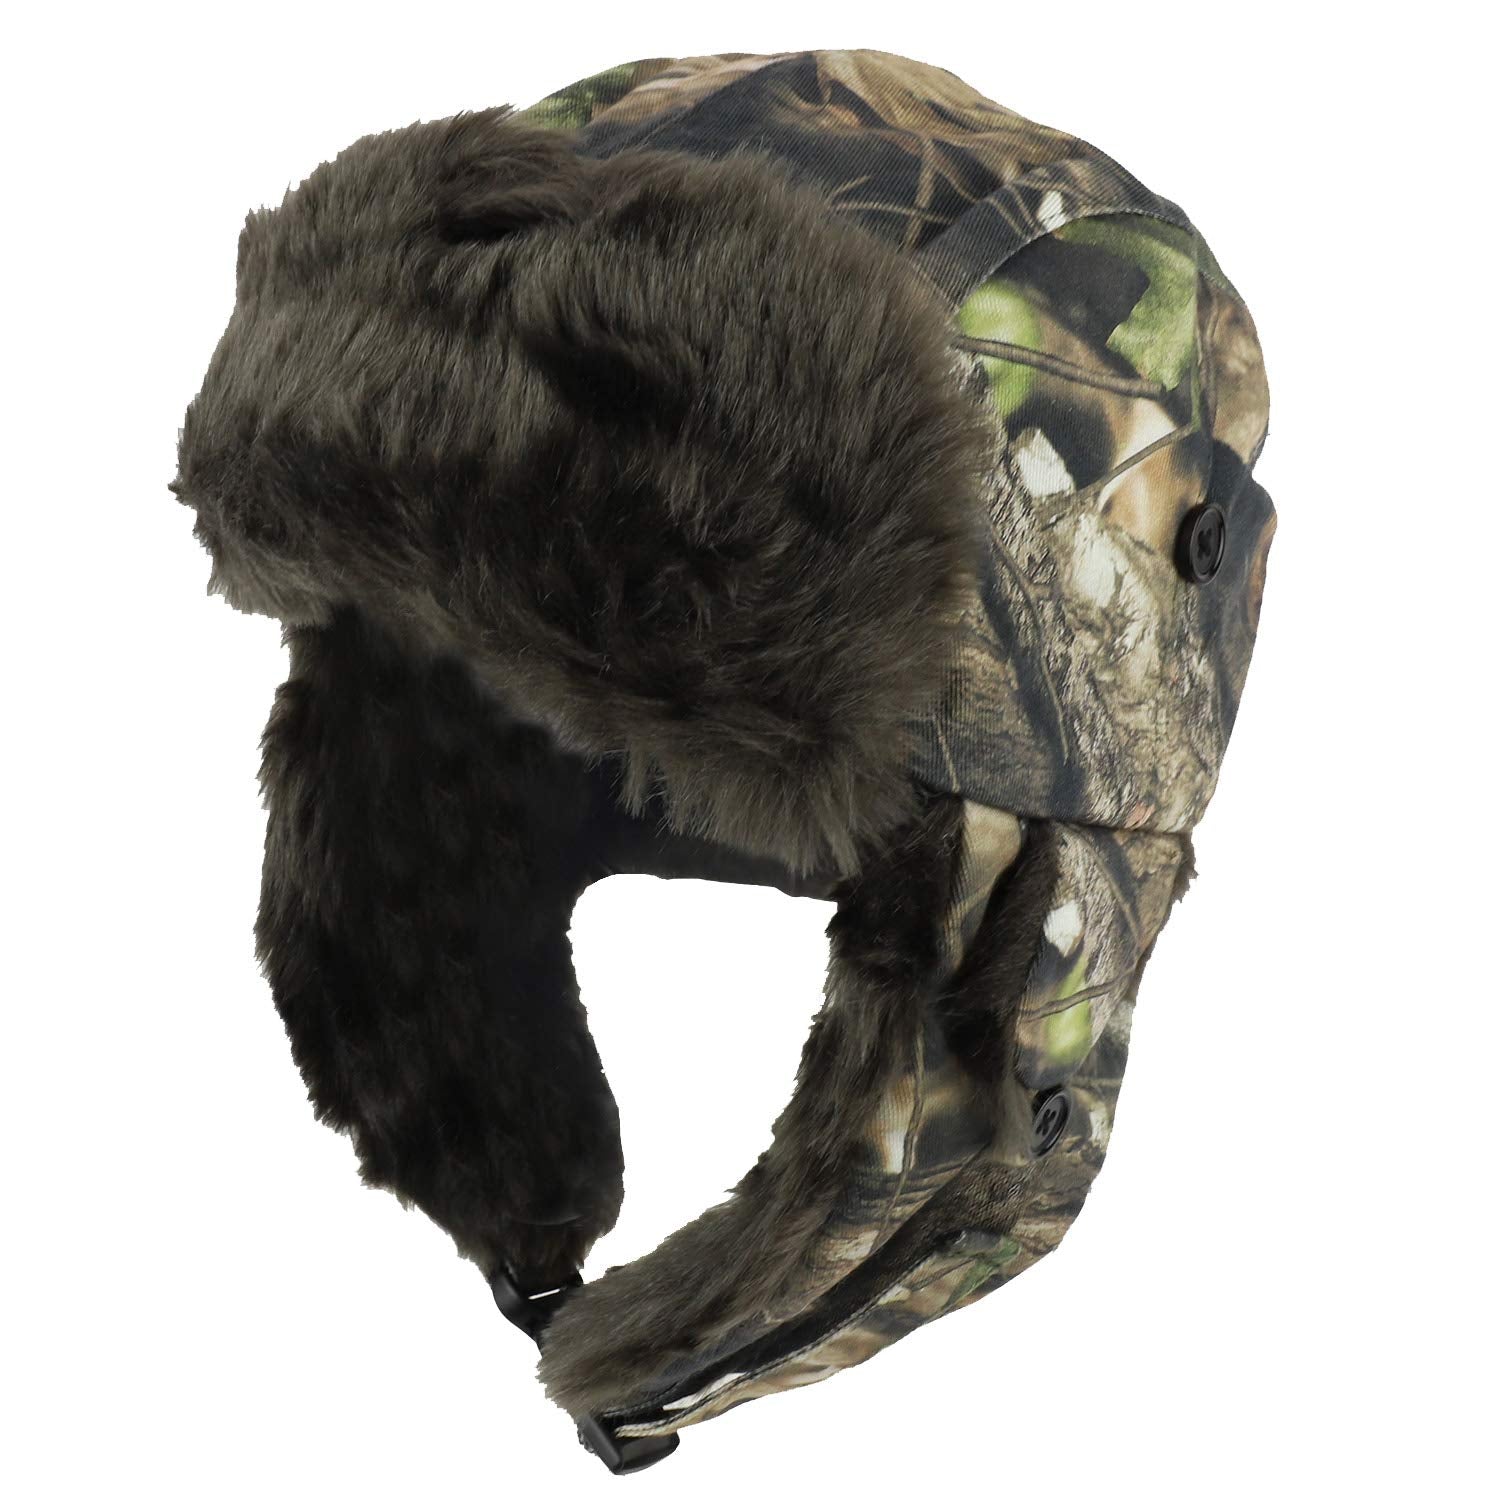 Armycrew HybriCam Camouflage Aviator Faux Fur Trooper Hat with Earflaps